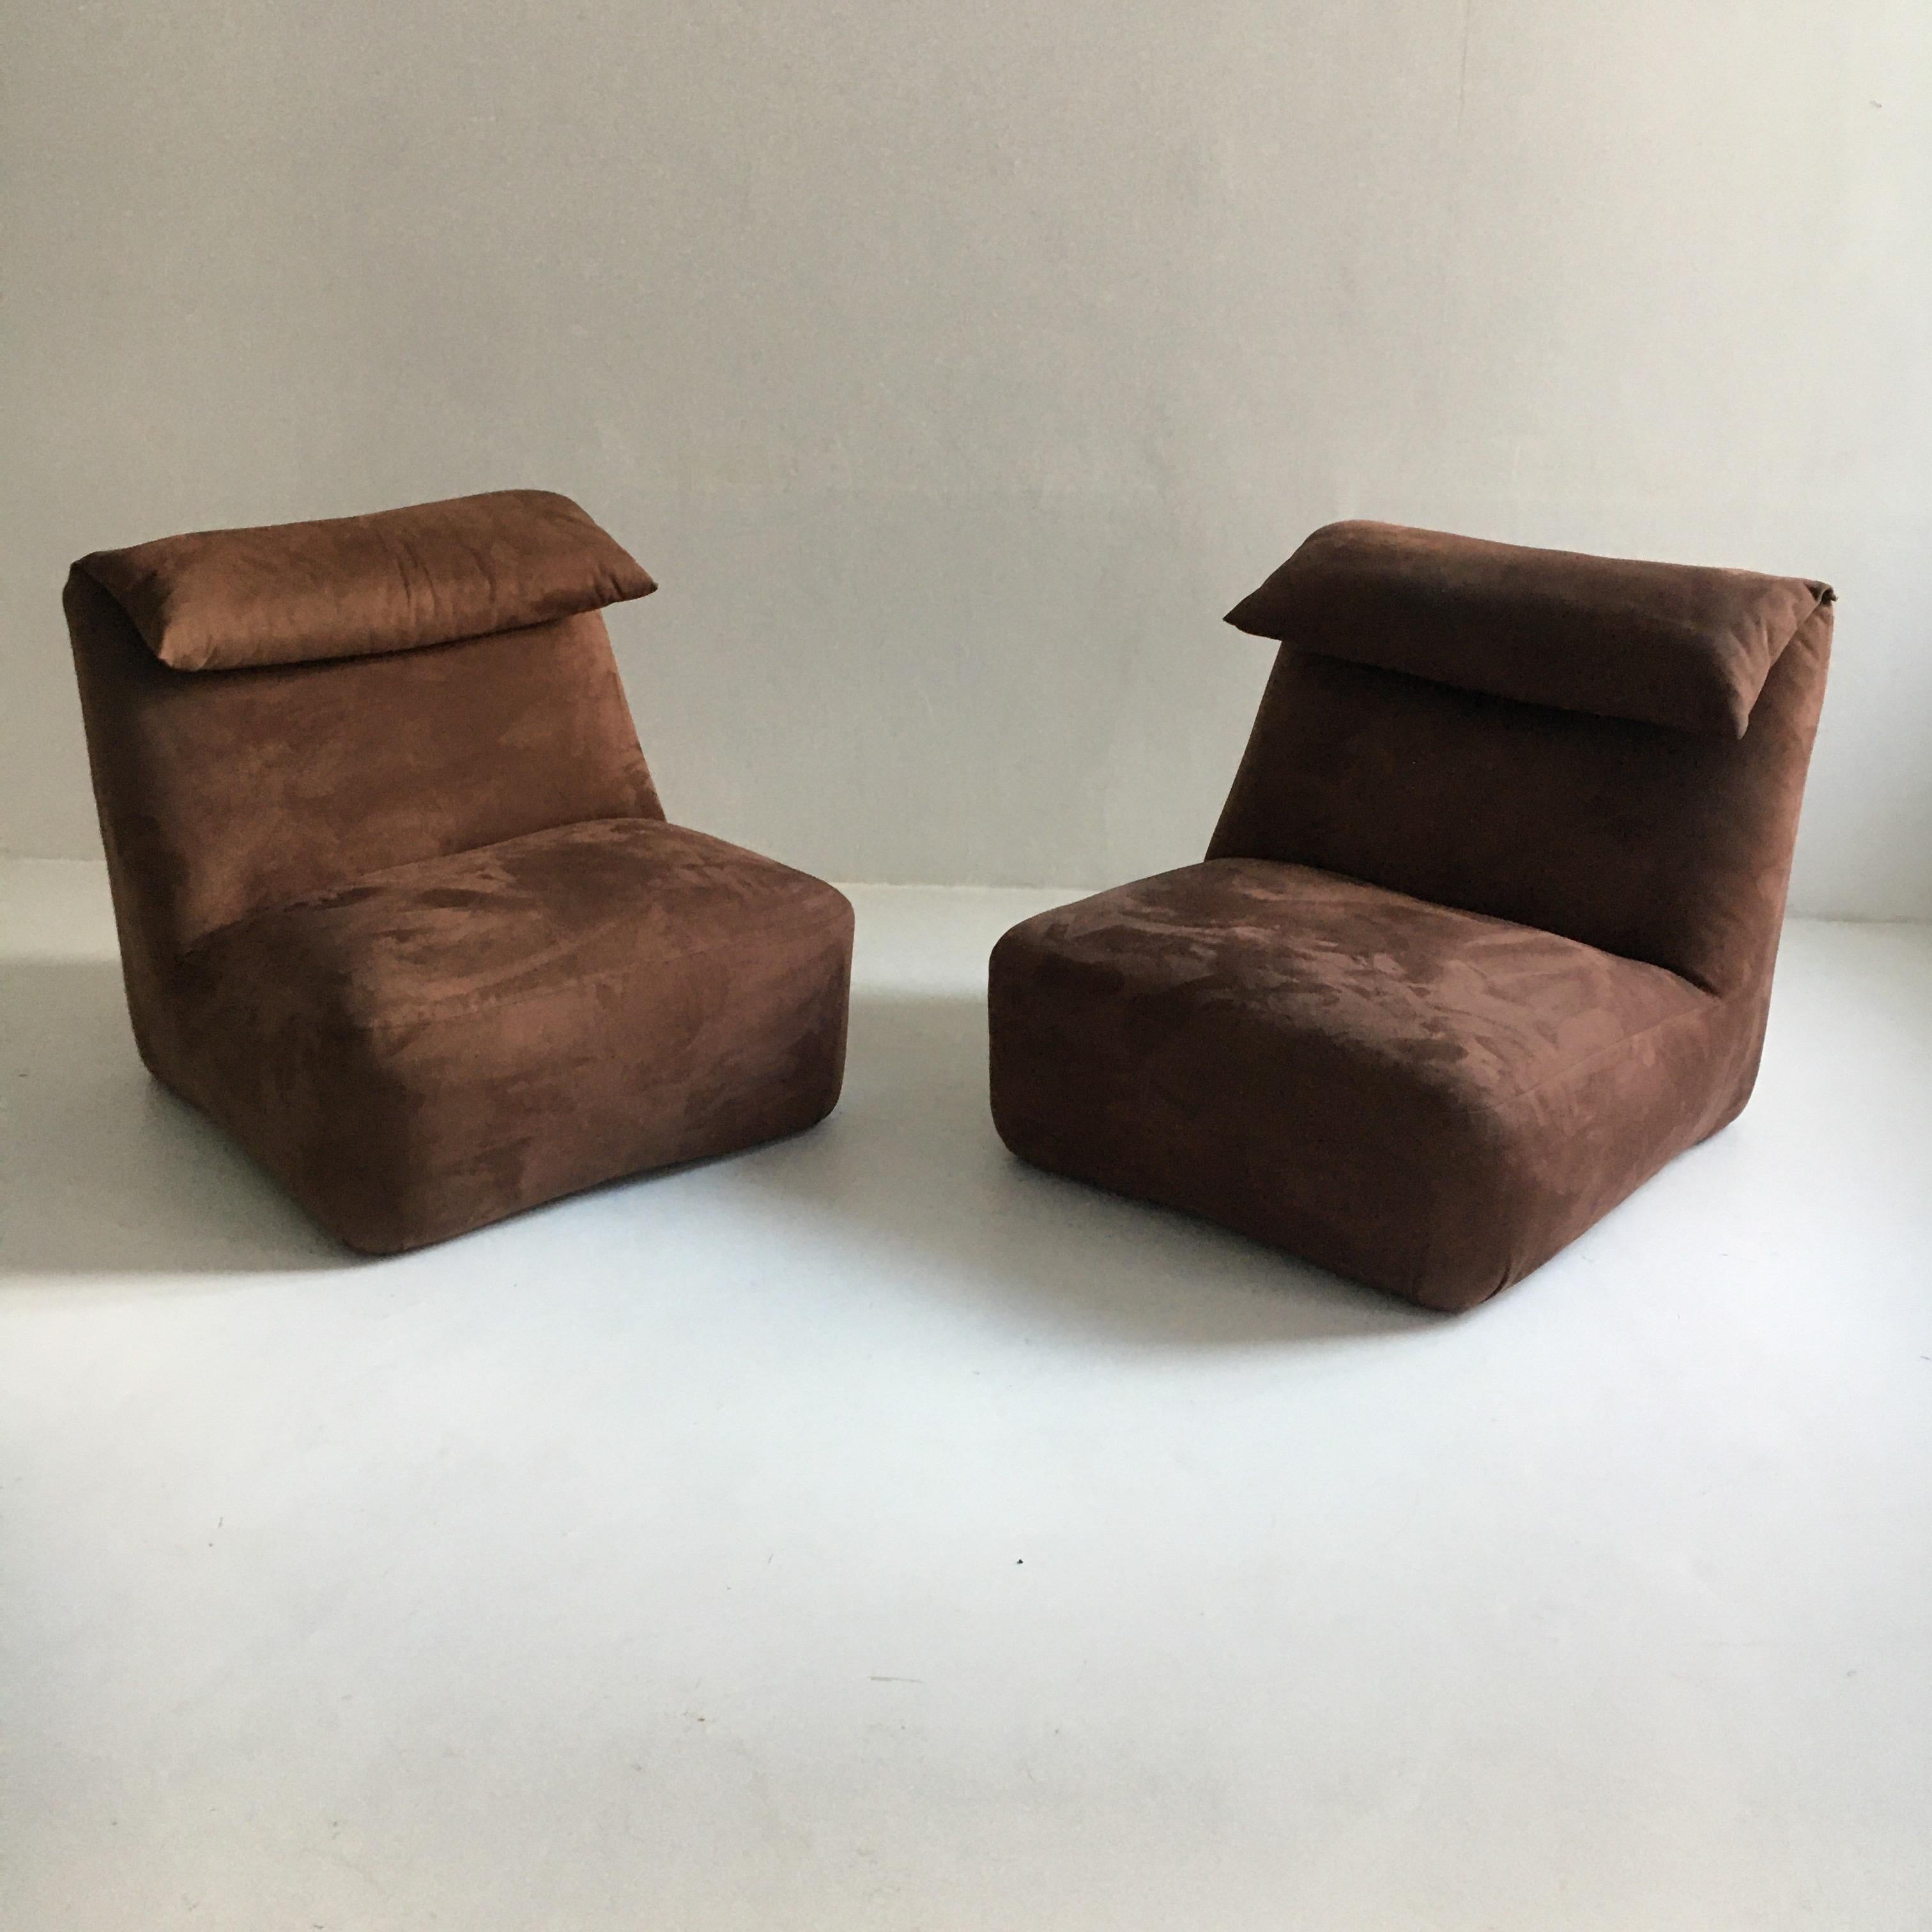 Mario Bellini Pair of 'Le Bambole' Lounge Chairs, Italy, 1970s For Sale 1